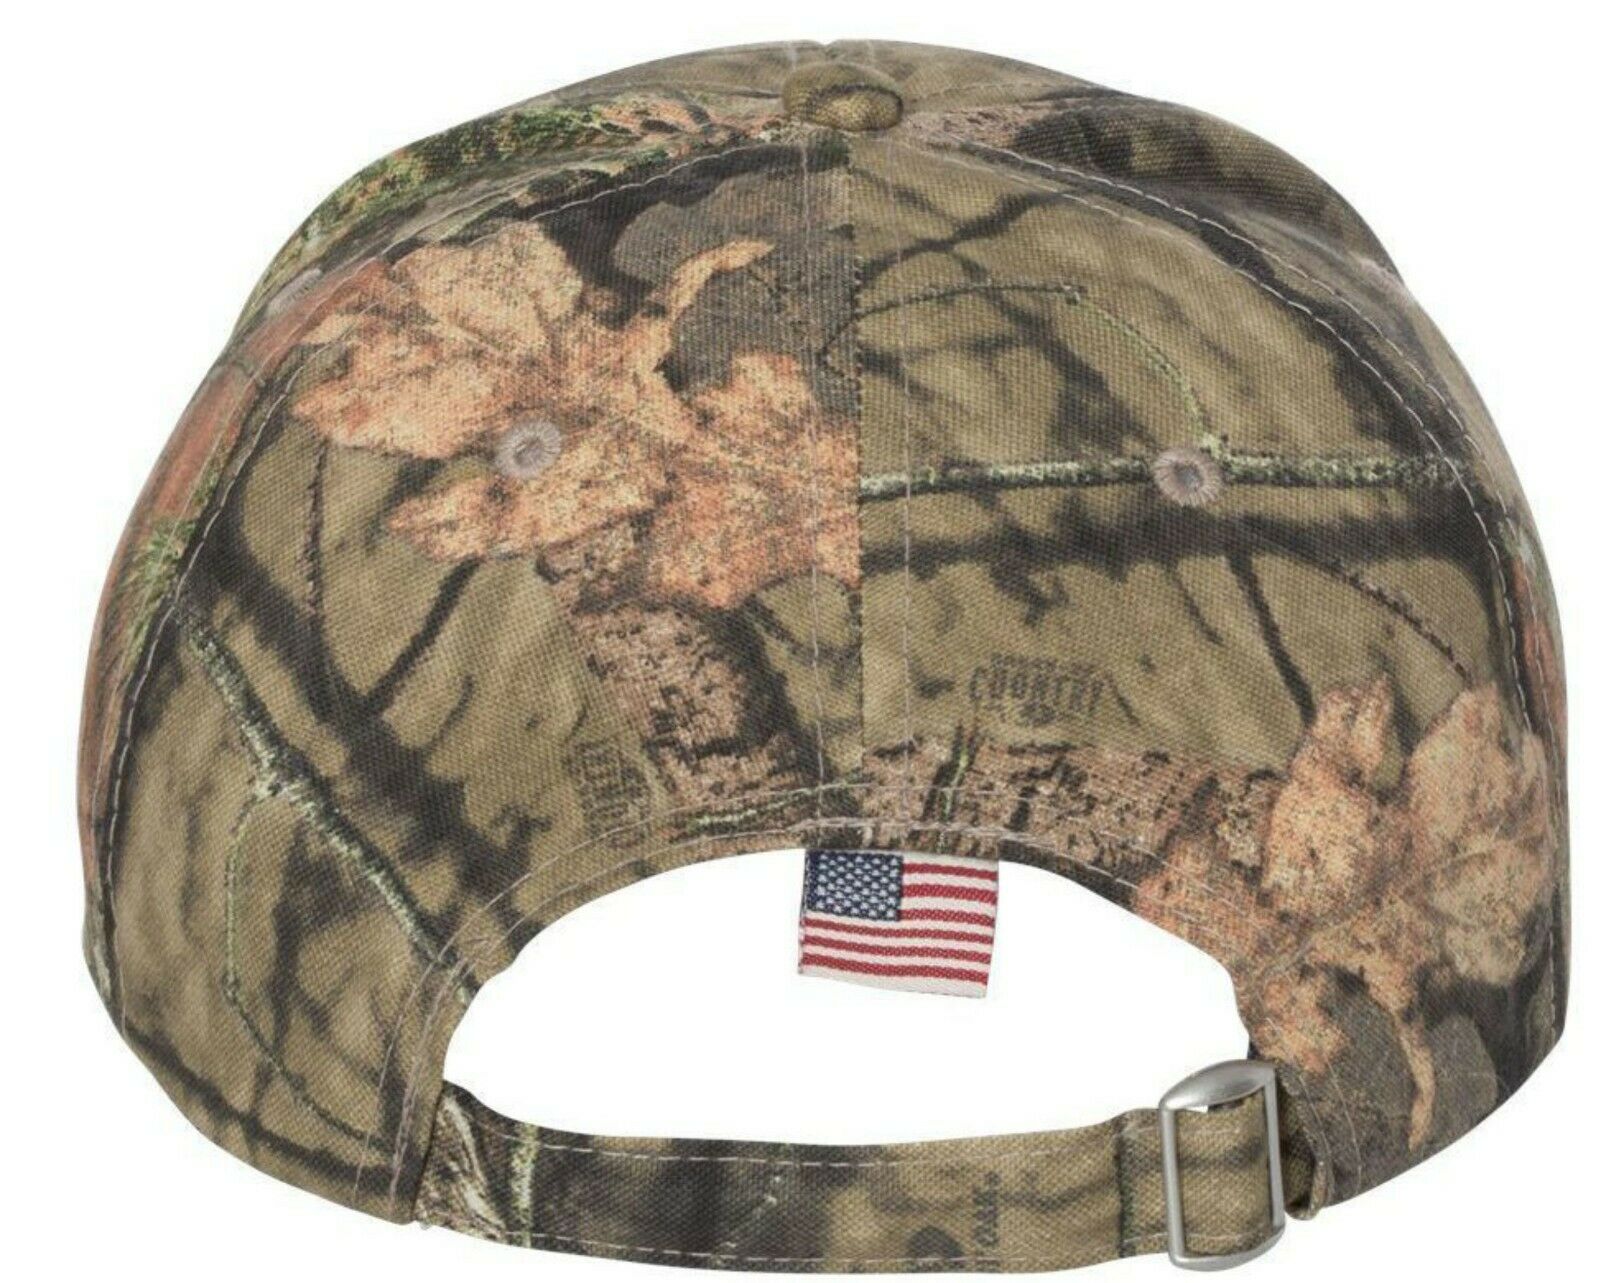 The Patriot Party Hat - Embroidered USA-300 / Mossy Adjustable Hat TRUMP 2024 - Powercall Sirens LLC